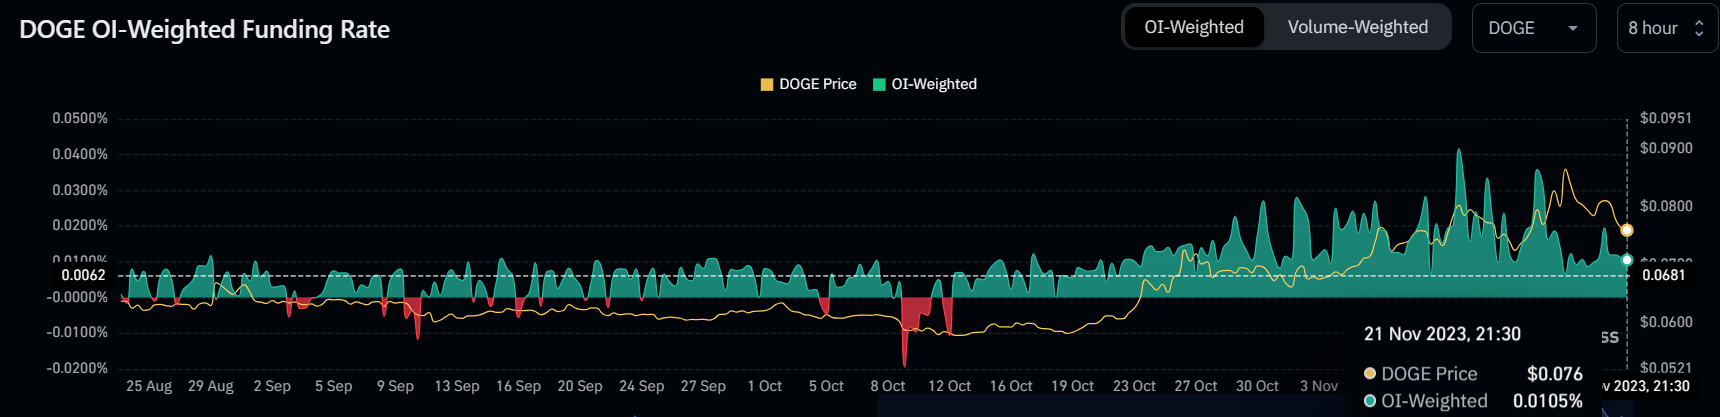 Dogecoin funding rate